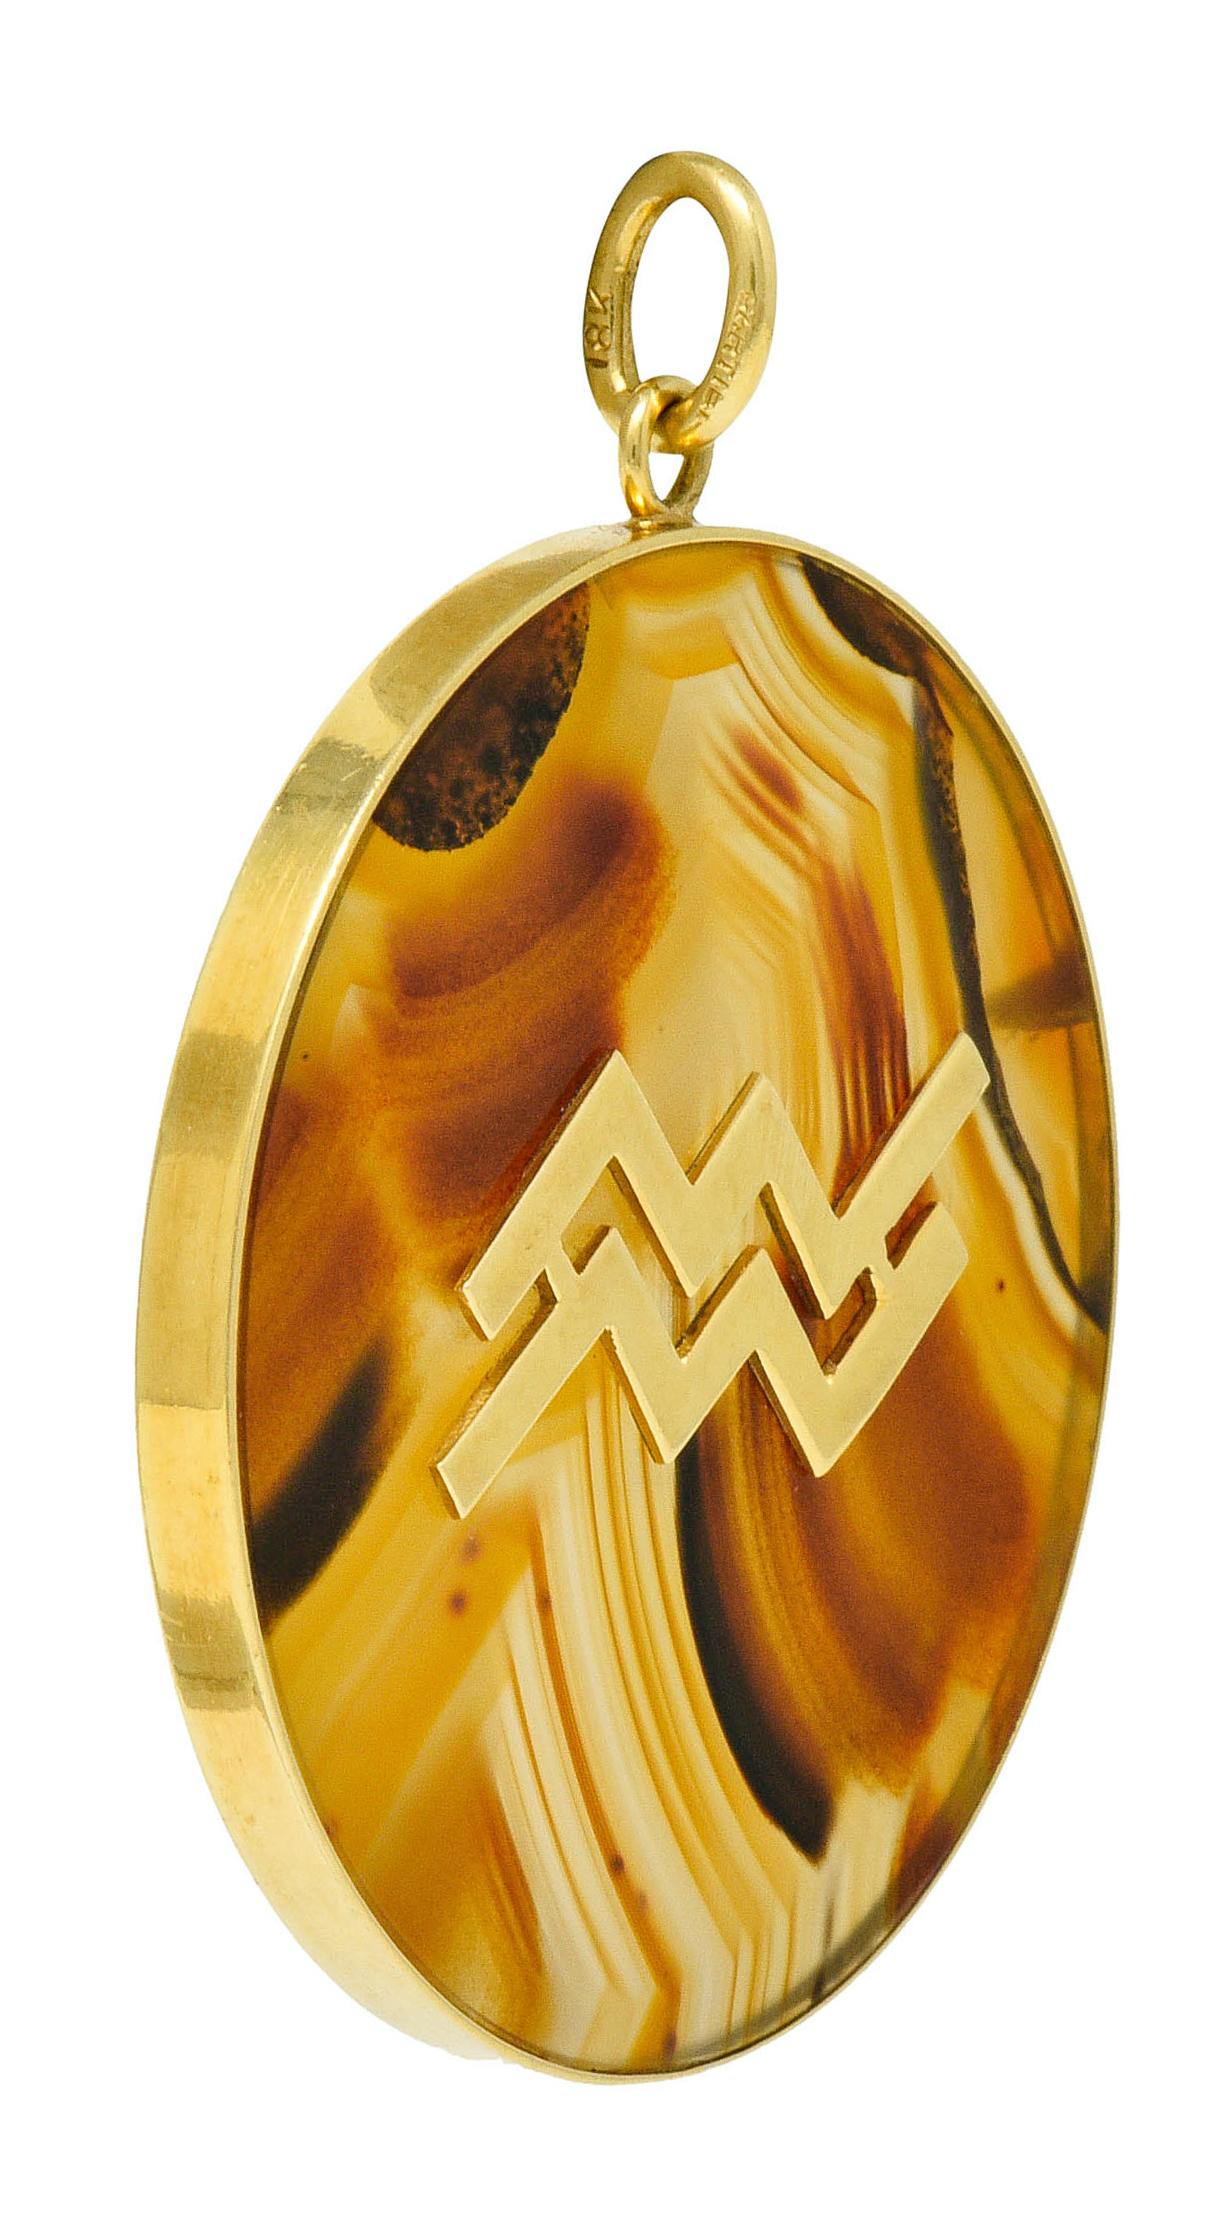 Large circular pendant features a bezel set tablet of agate

Semi-transparent and colorless with brown to yellow ochre banding throughout

Centering a highly polished gold emblem depicting stylized zodiac waves of Aquarius

Completed by a jump ring